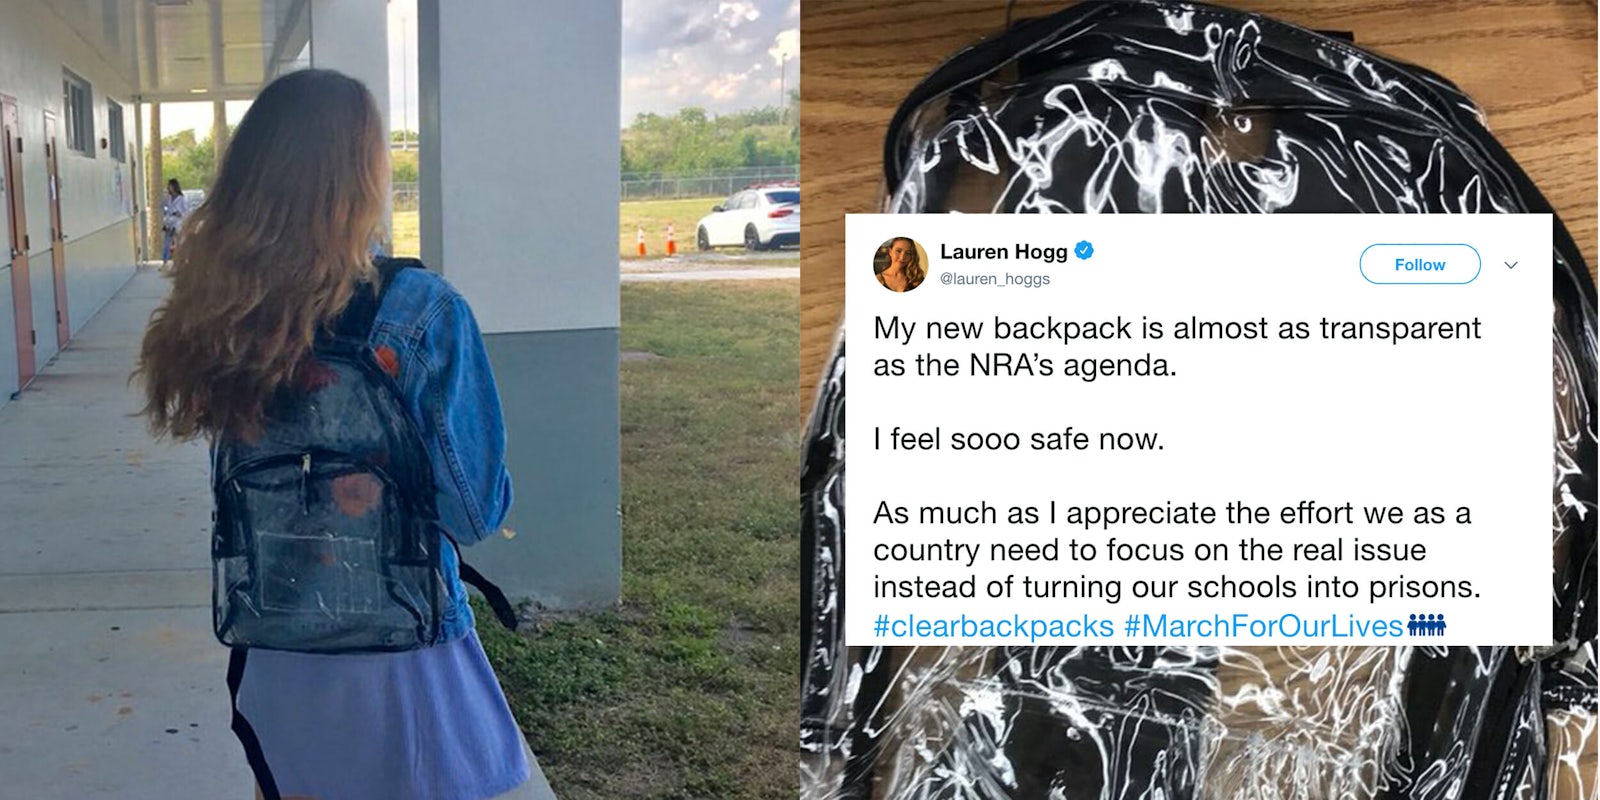 Students at Marjory Stoneman Douglas High School are criticizing and mocking their new clear backpacks on Twitter.